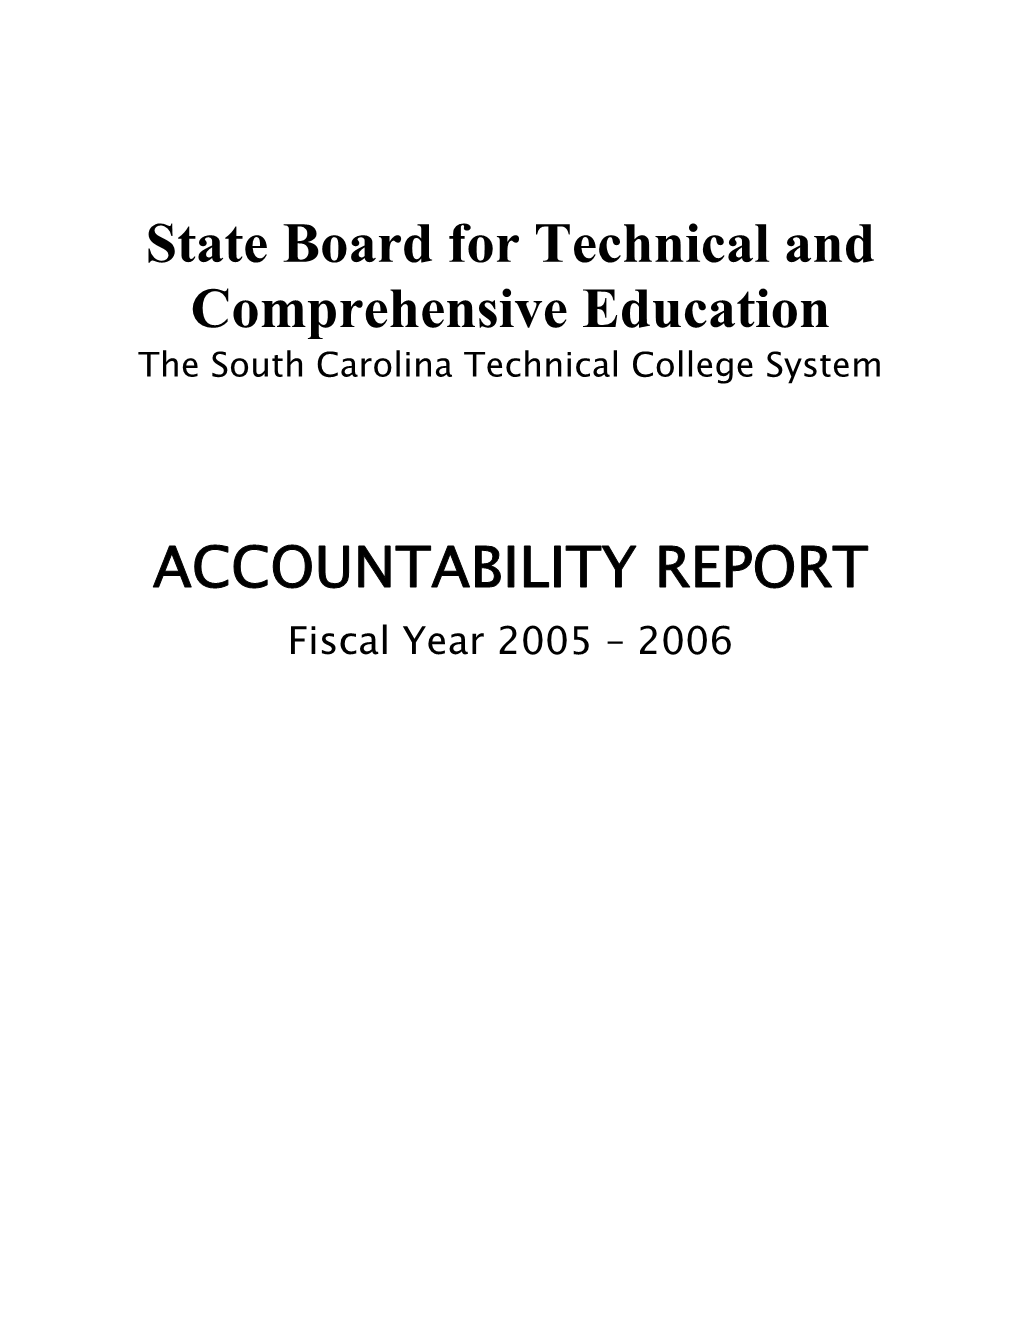 State Board for Technical and Comprehensive Education